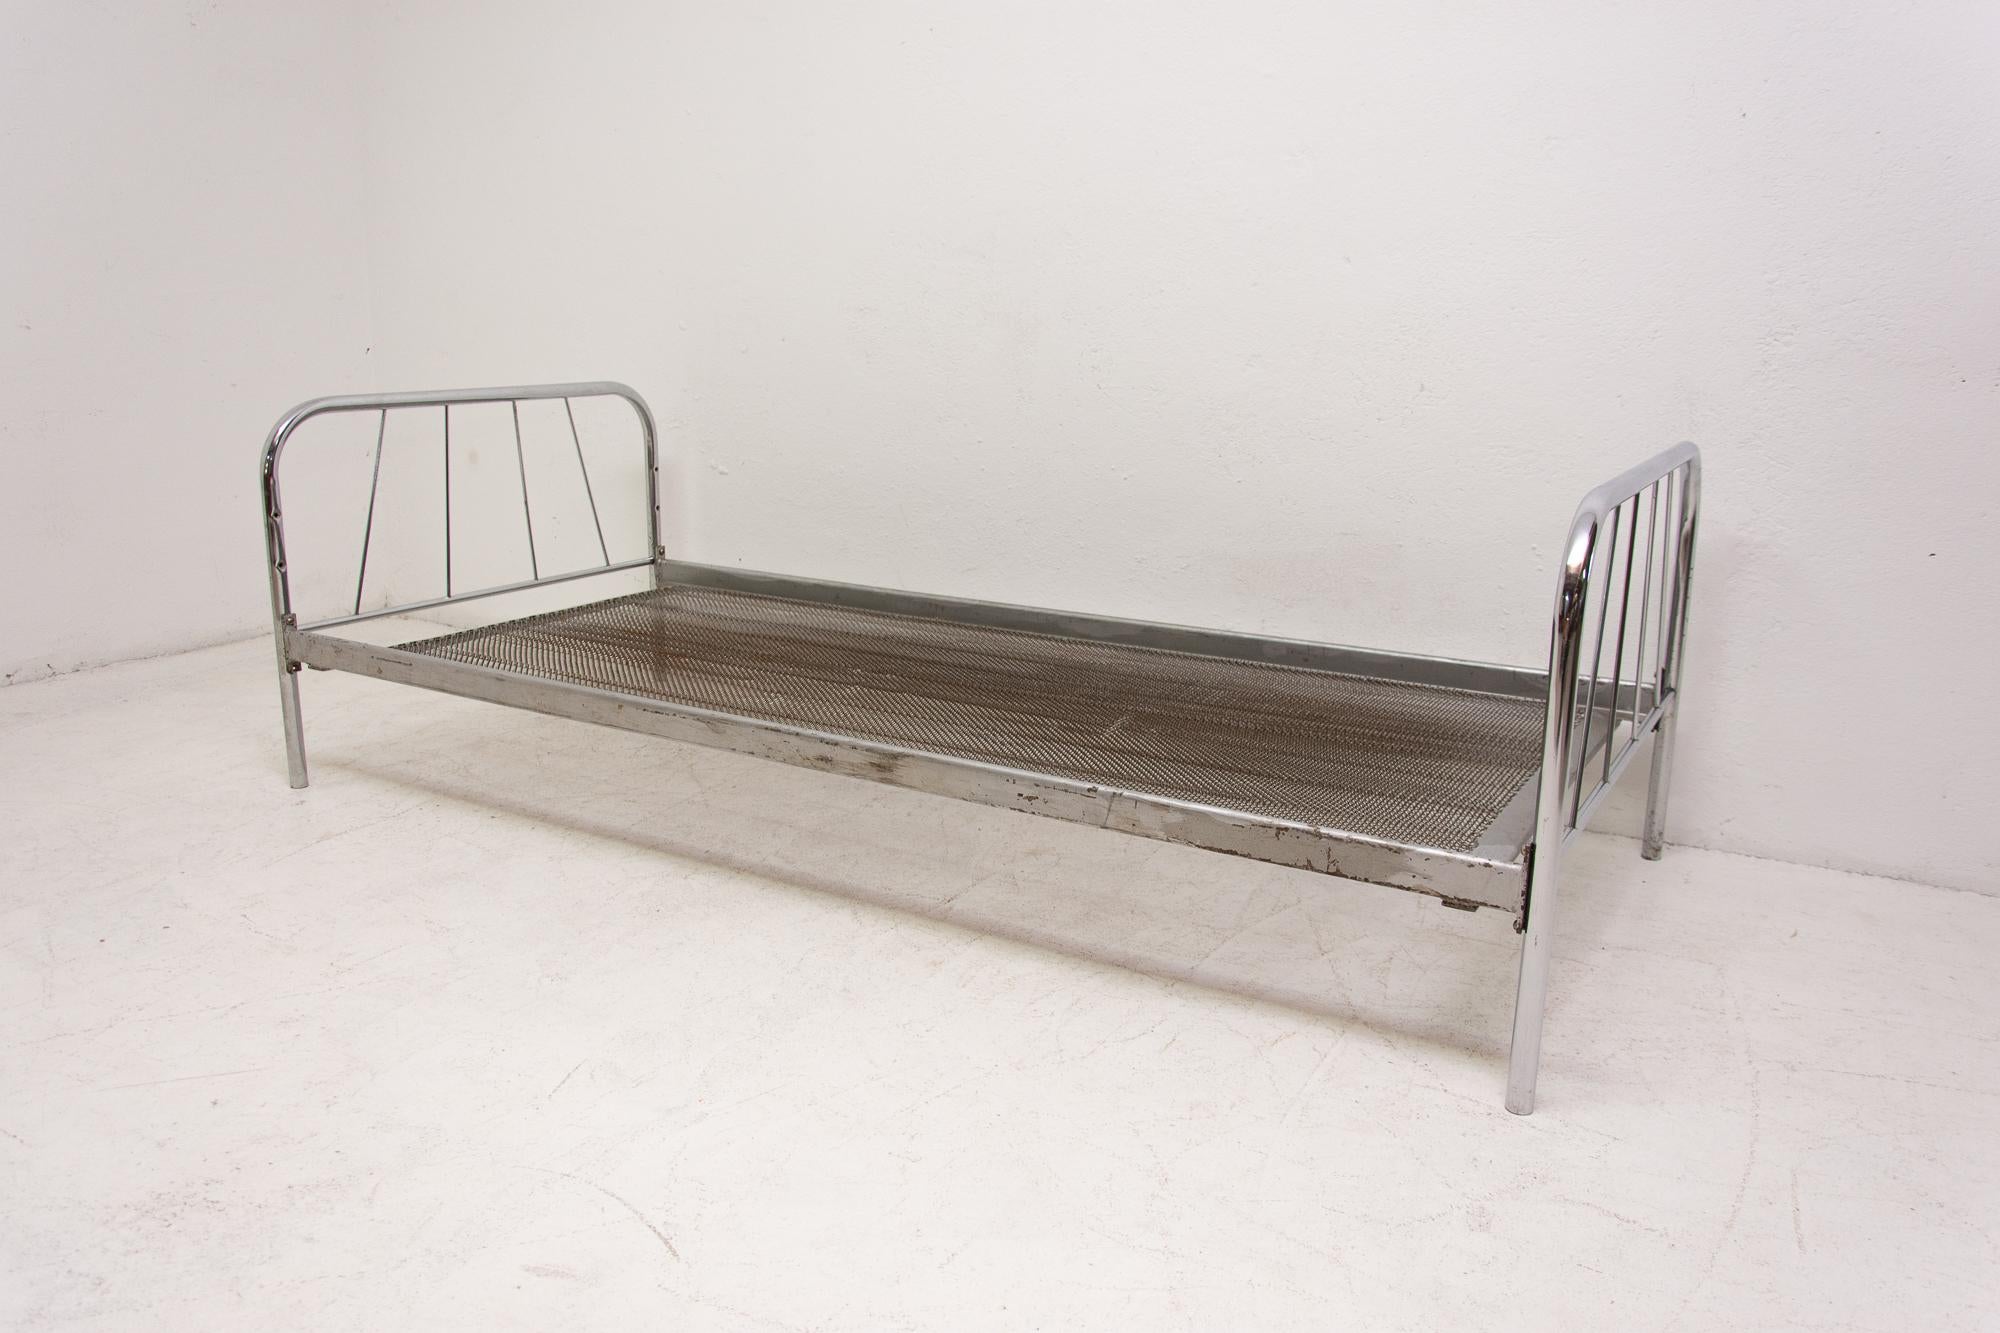 Plated Midcentury Chromed Beds, Eastern Bloc, 1950s